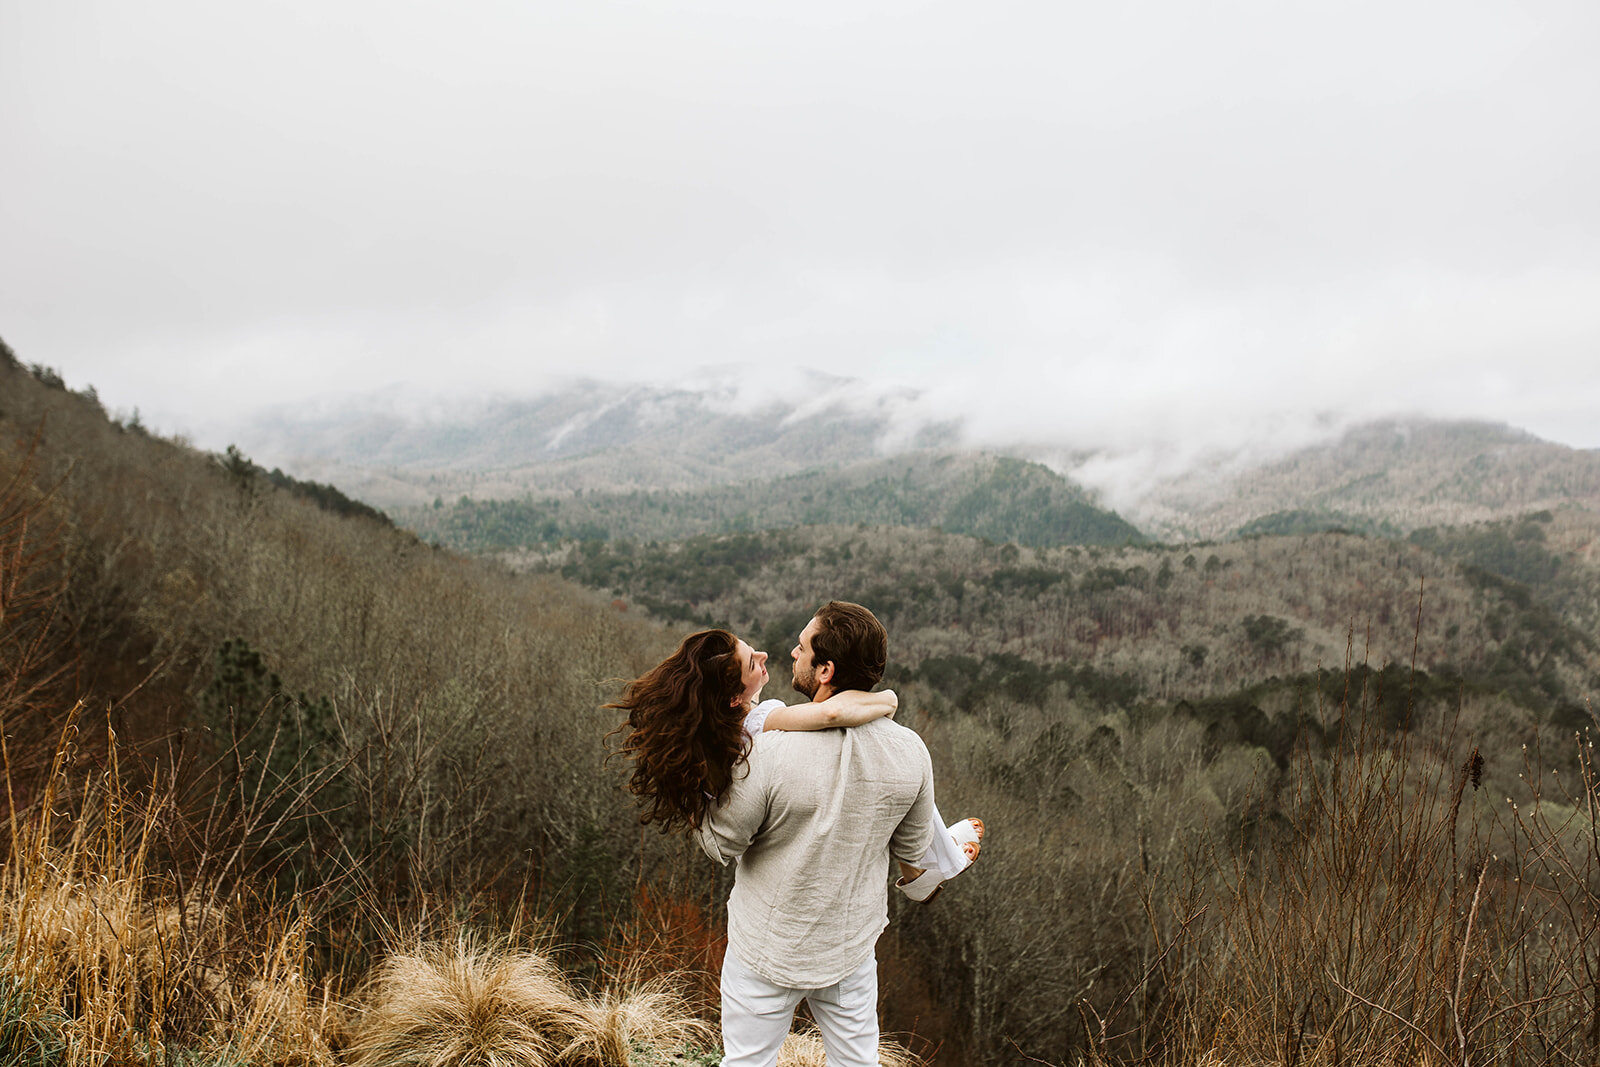 adventure-engagement-in-the-great-smoky-mountains-chattanooga-elopement-photographer5Y6A5391_websize.jpg